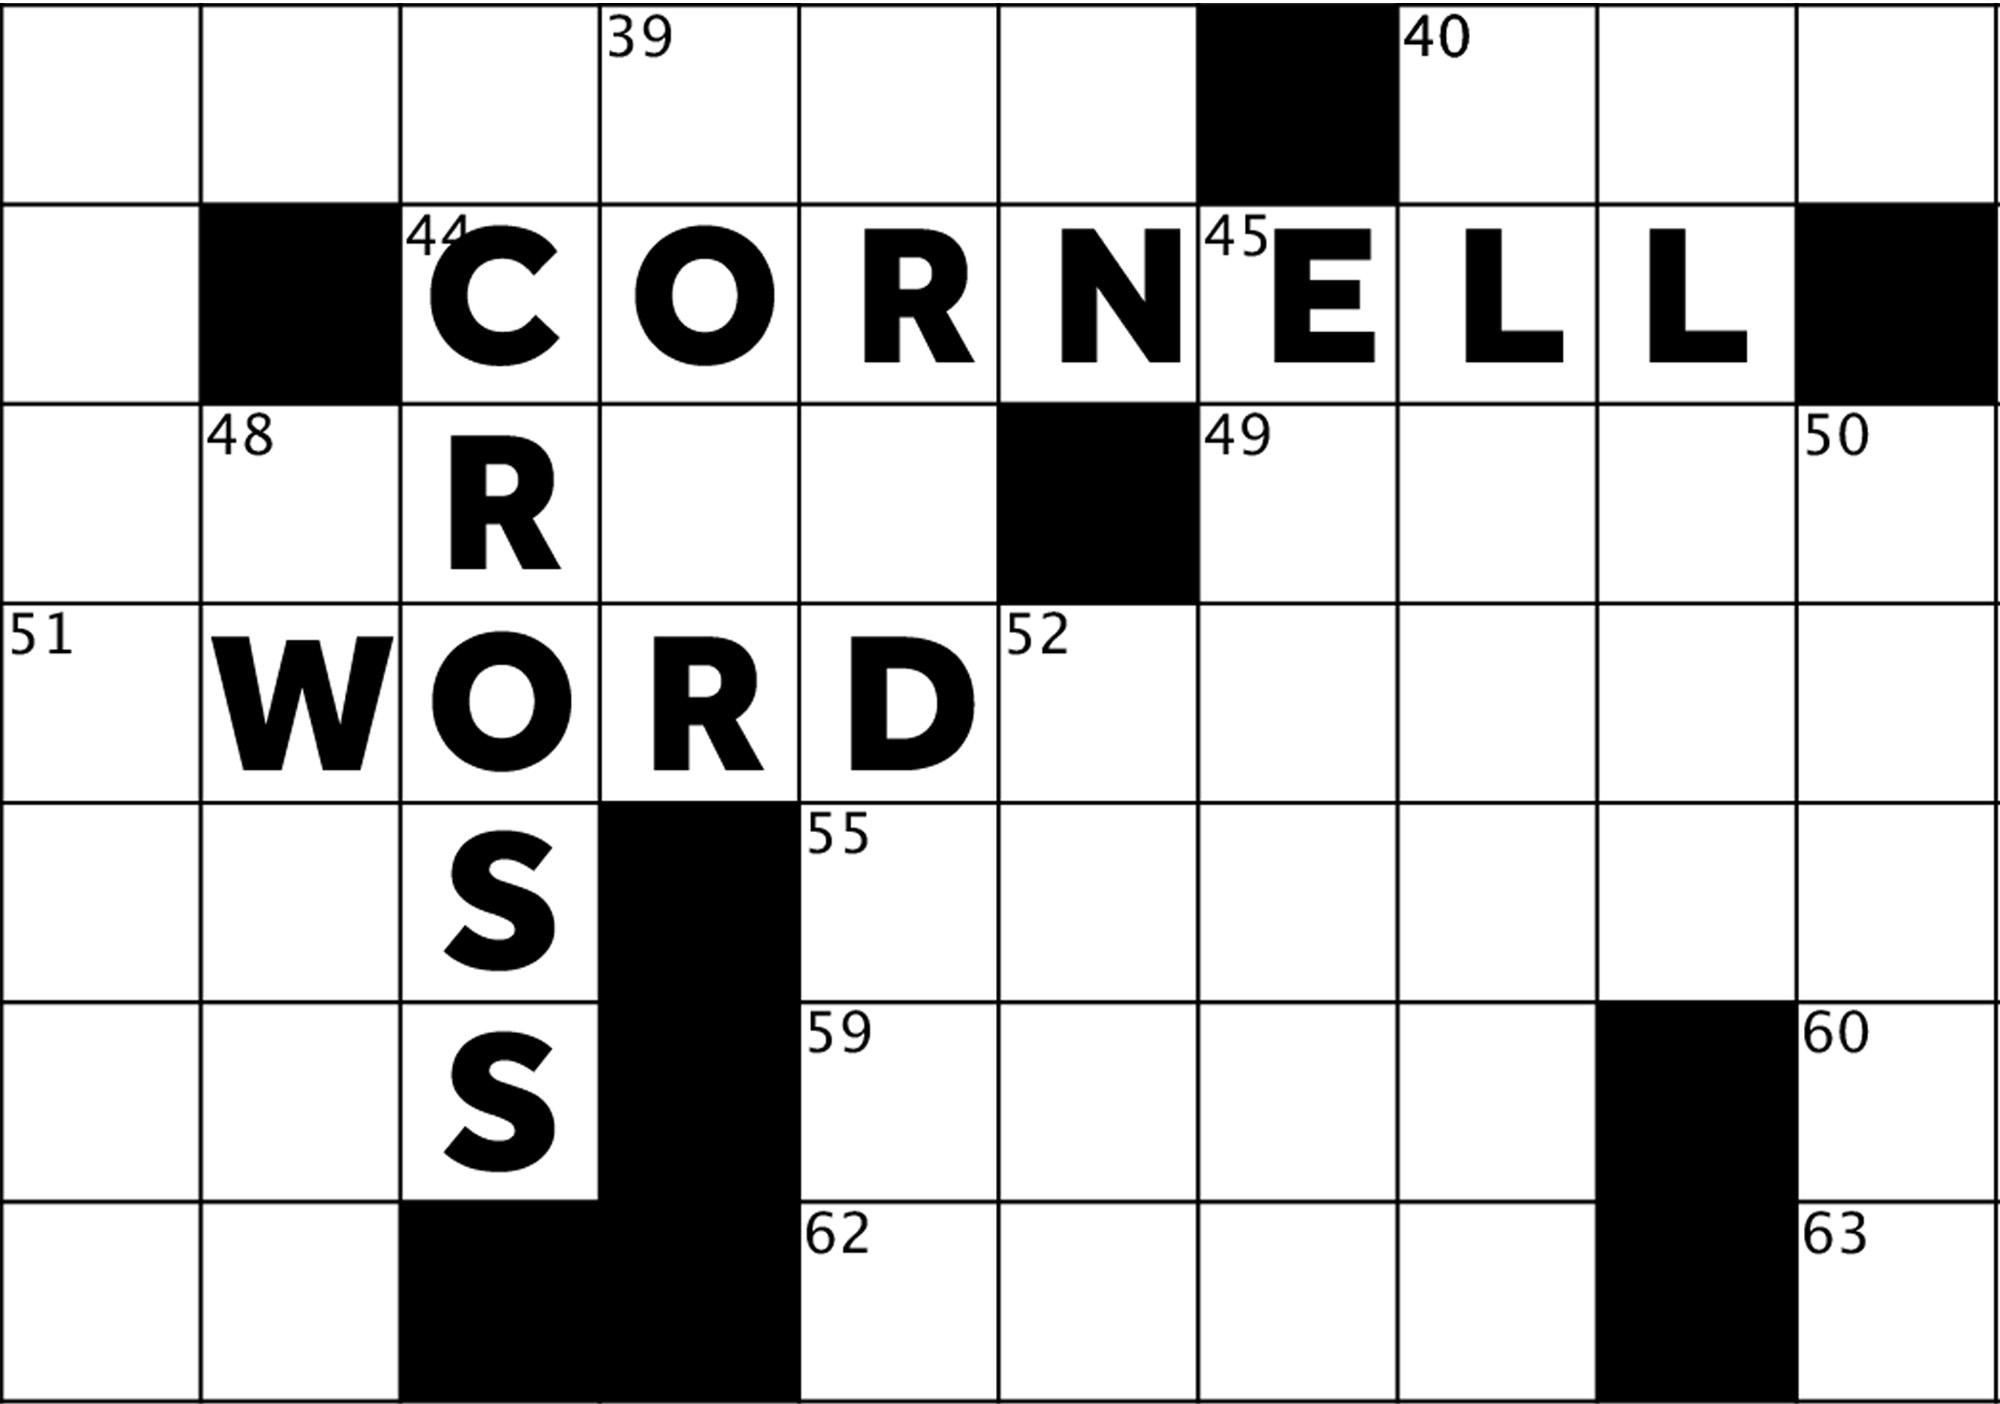 CORNELL CROSSWORD, October 19 (Puzzle and Answers)